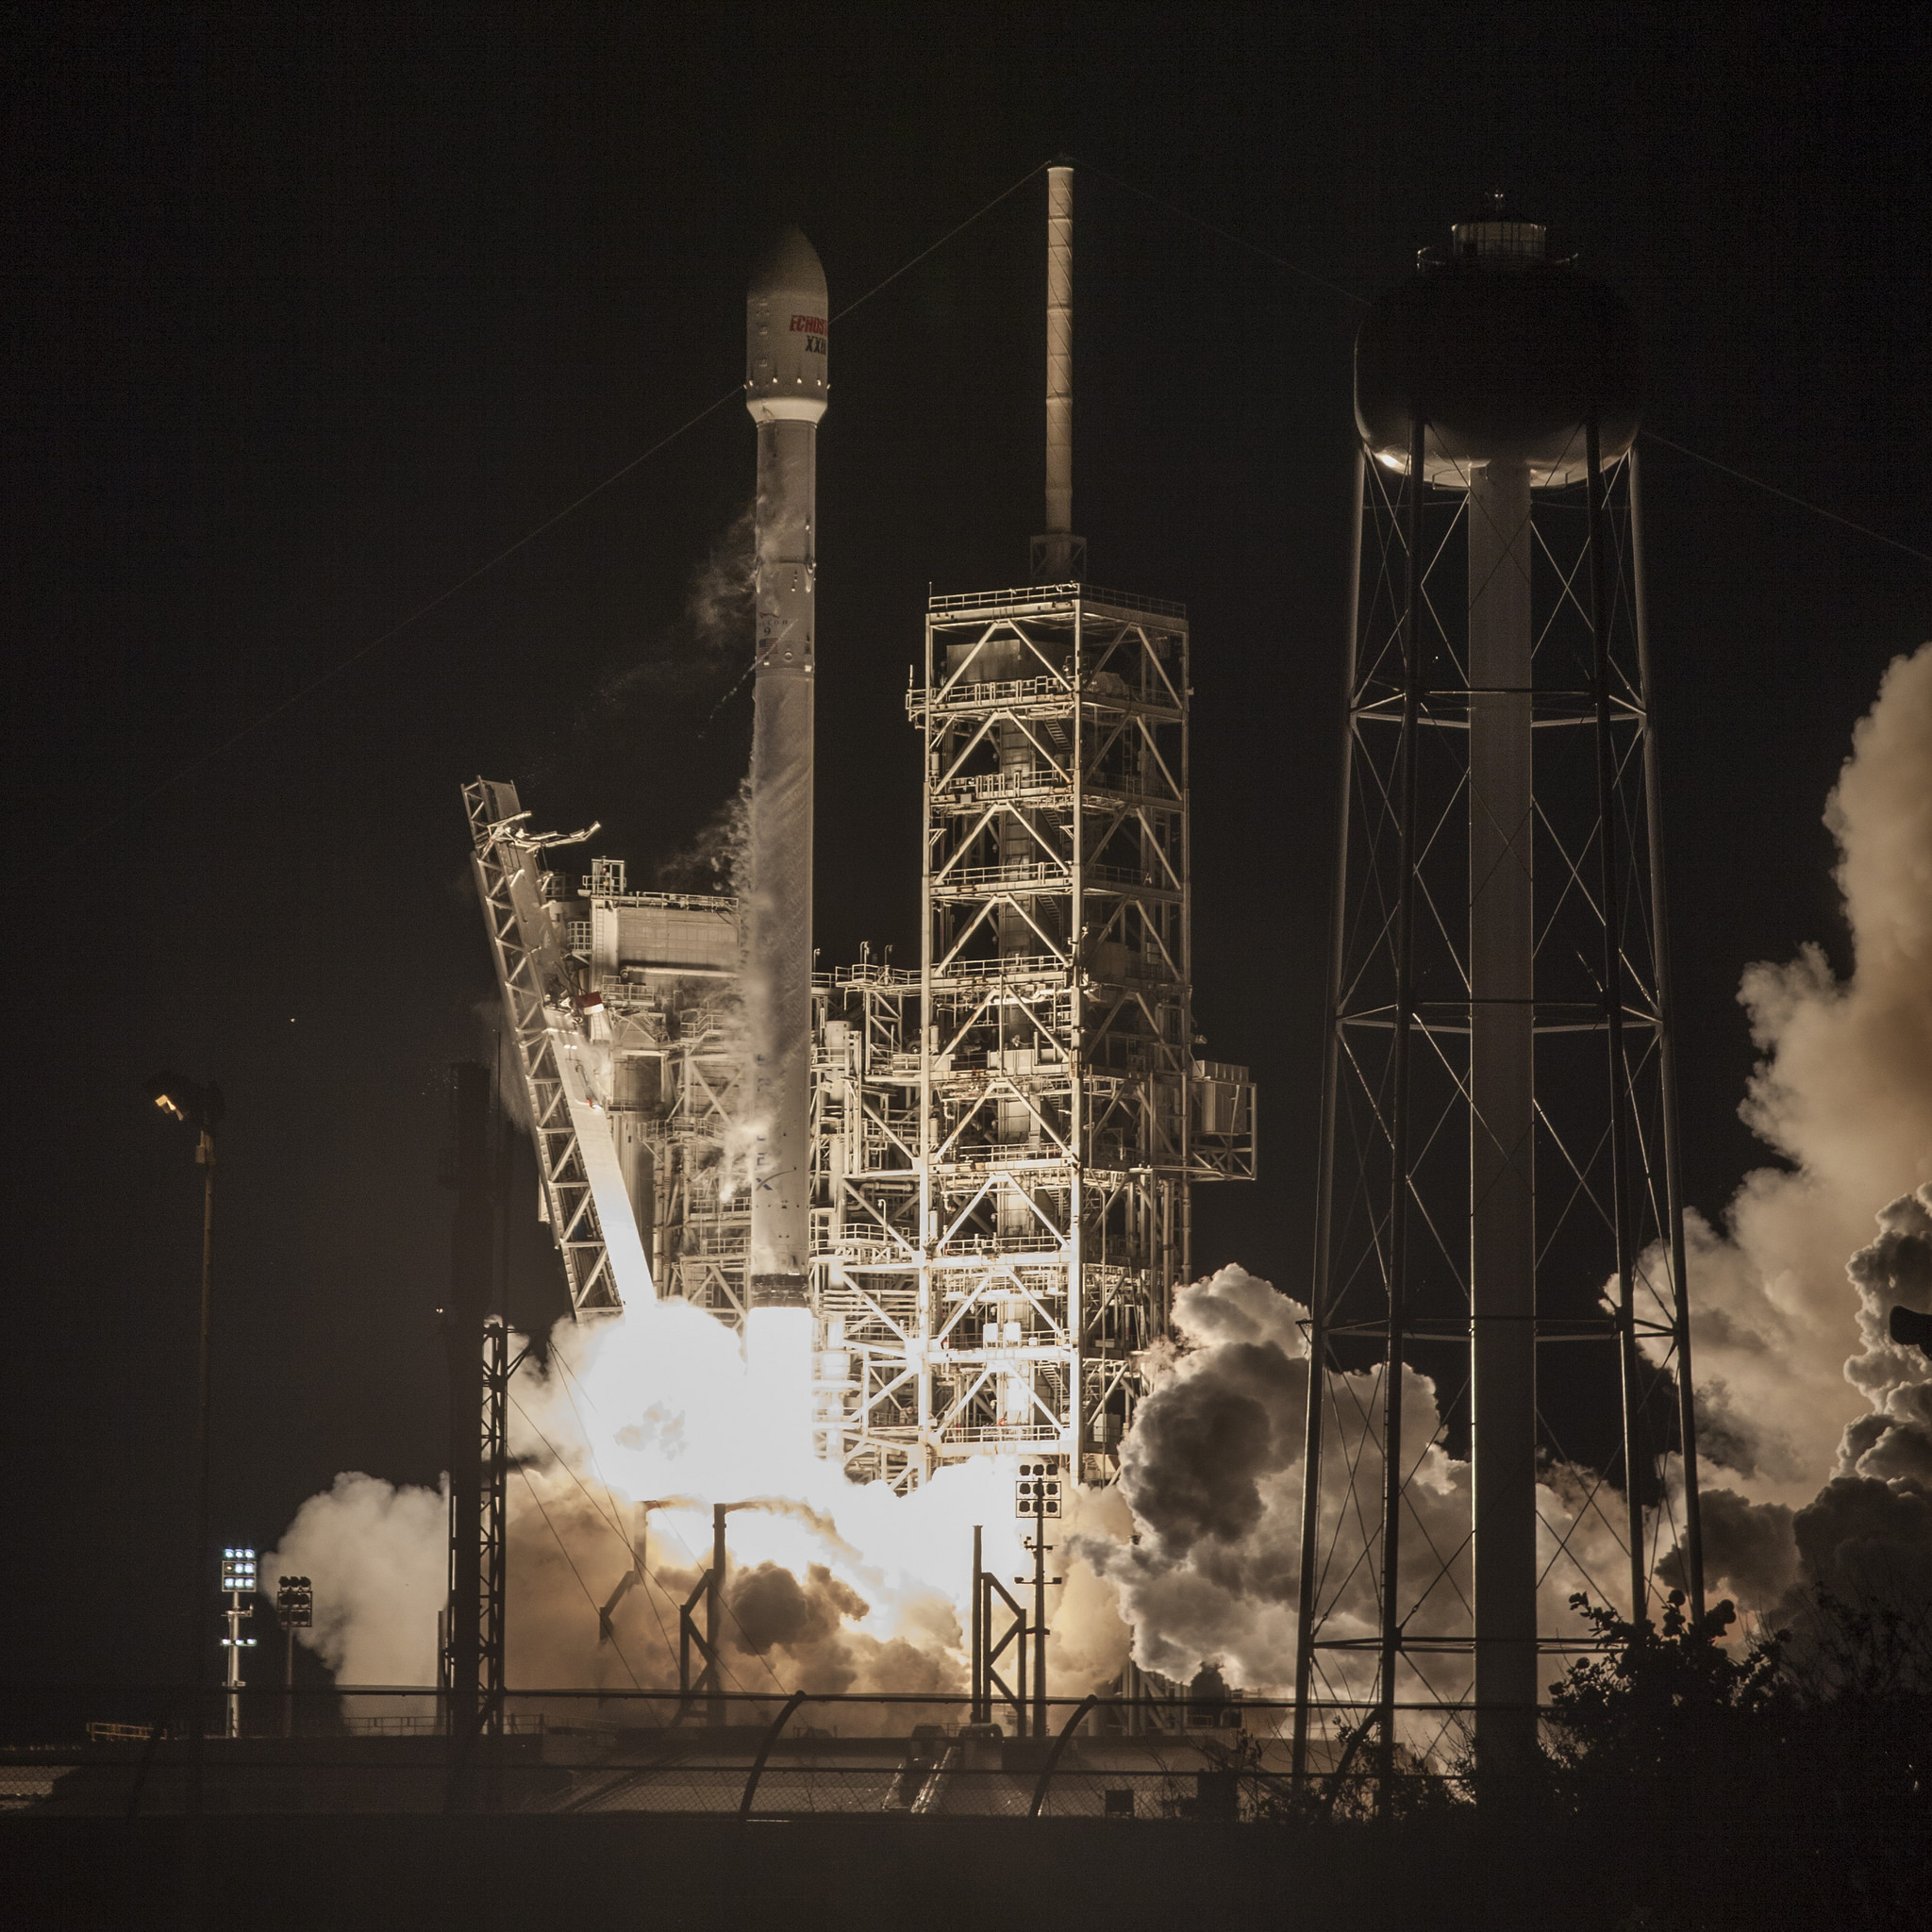 The SpaceX Falcon 9 rocket lifts off from Pad 39A at NASA's Kennedy Space Center in Florida to send the EchoStar 23 satellite into orbit. The was expected to be SpaceX's last flight that would throw away the Falcon 9 first stage.